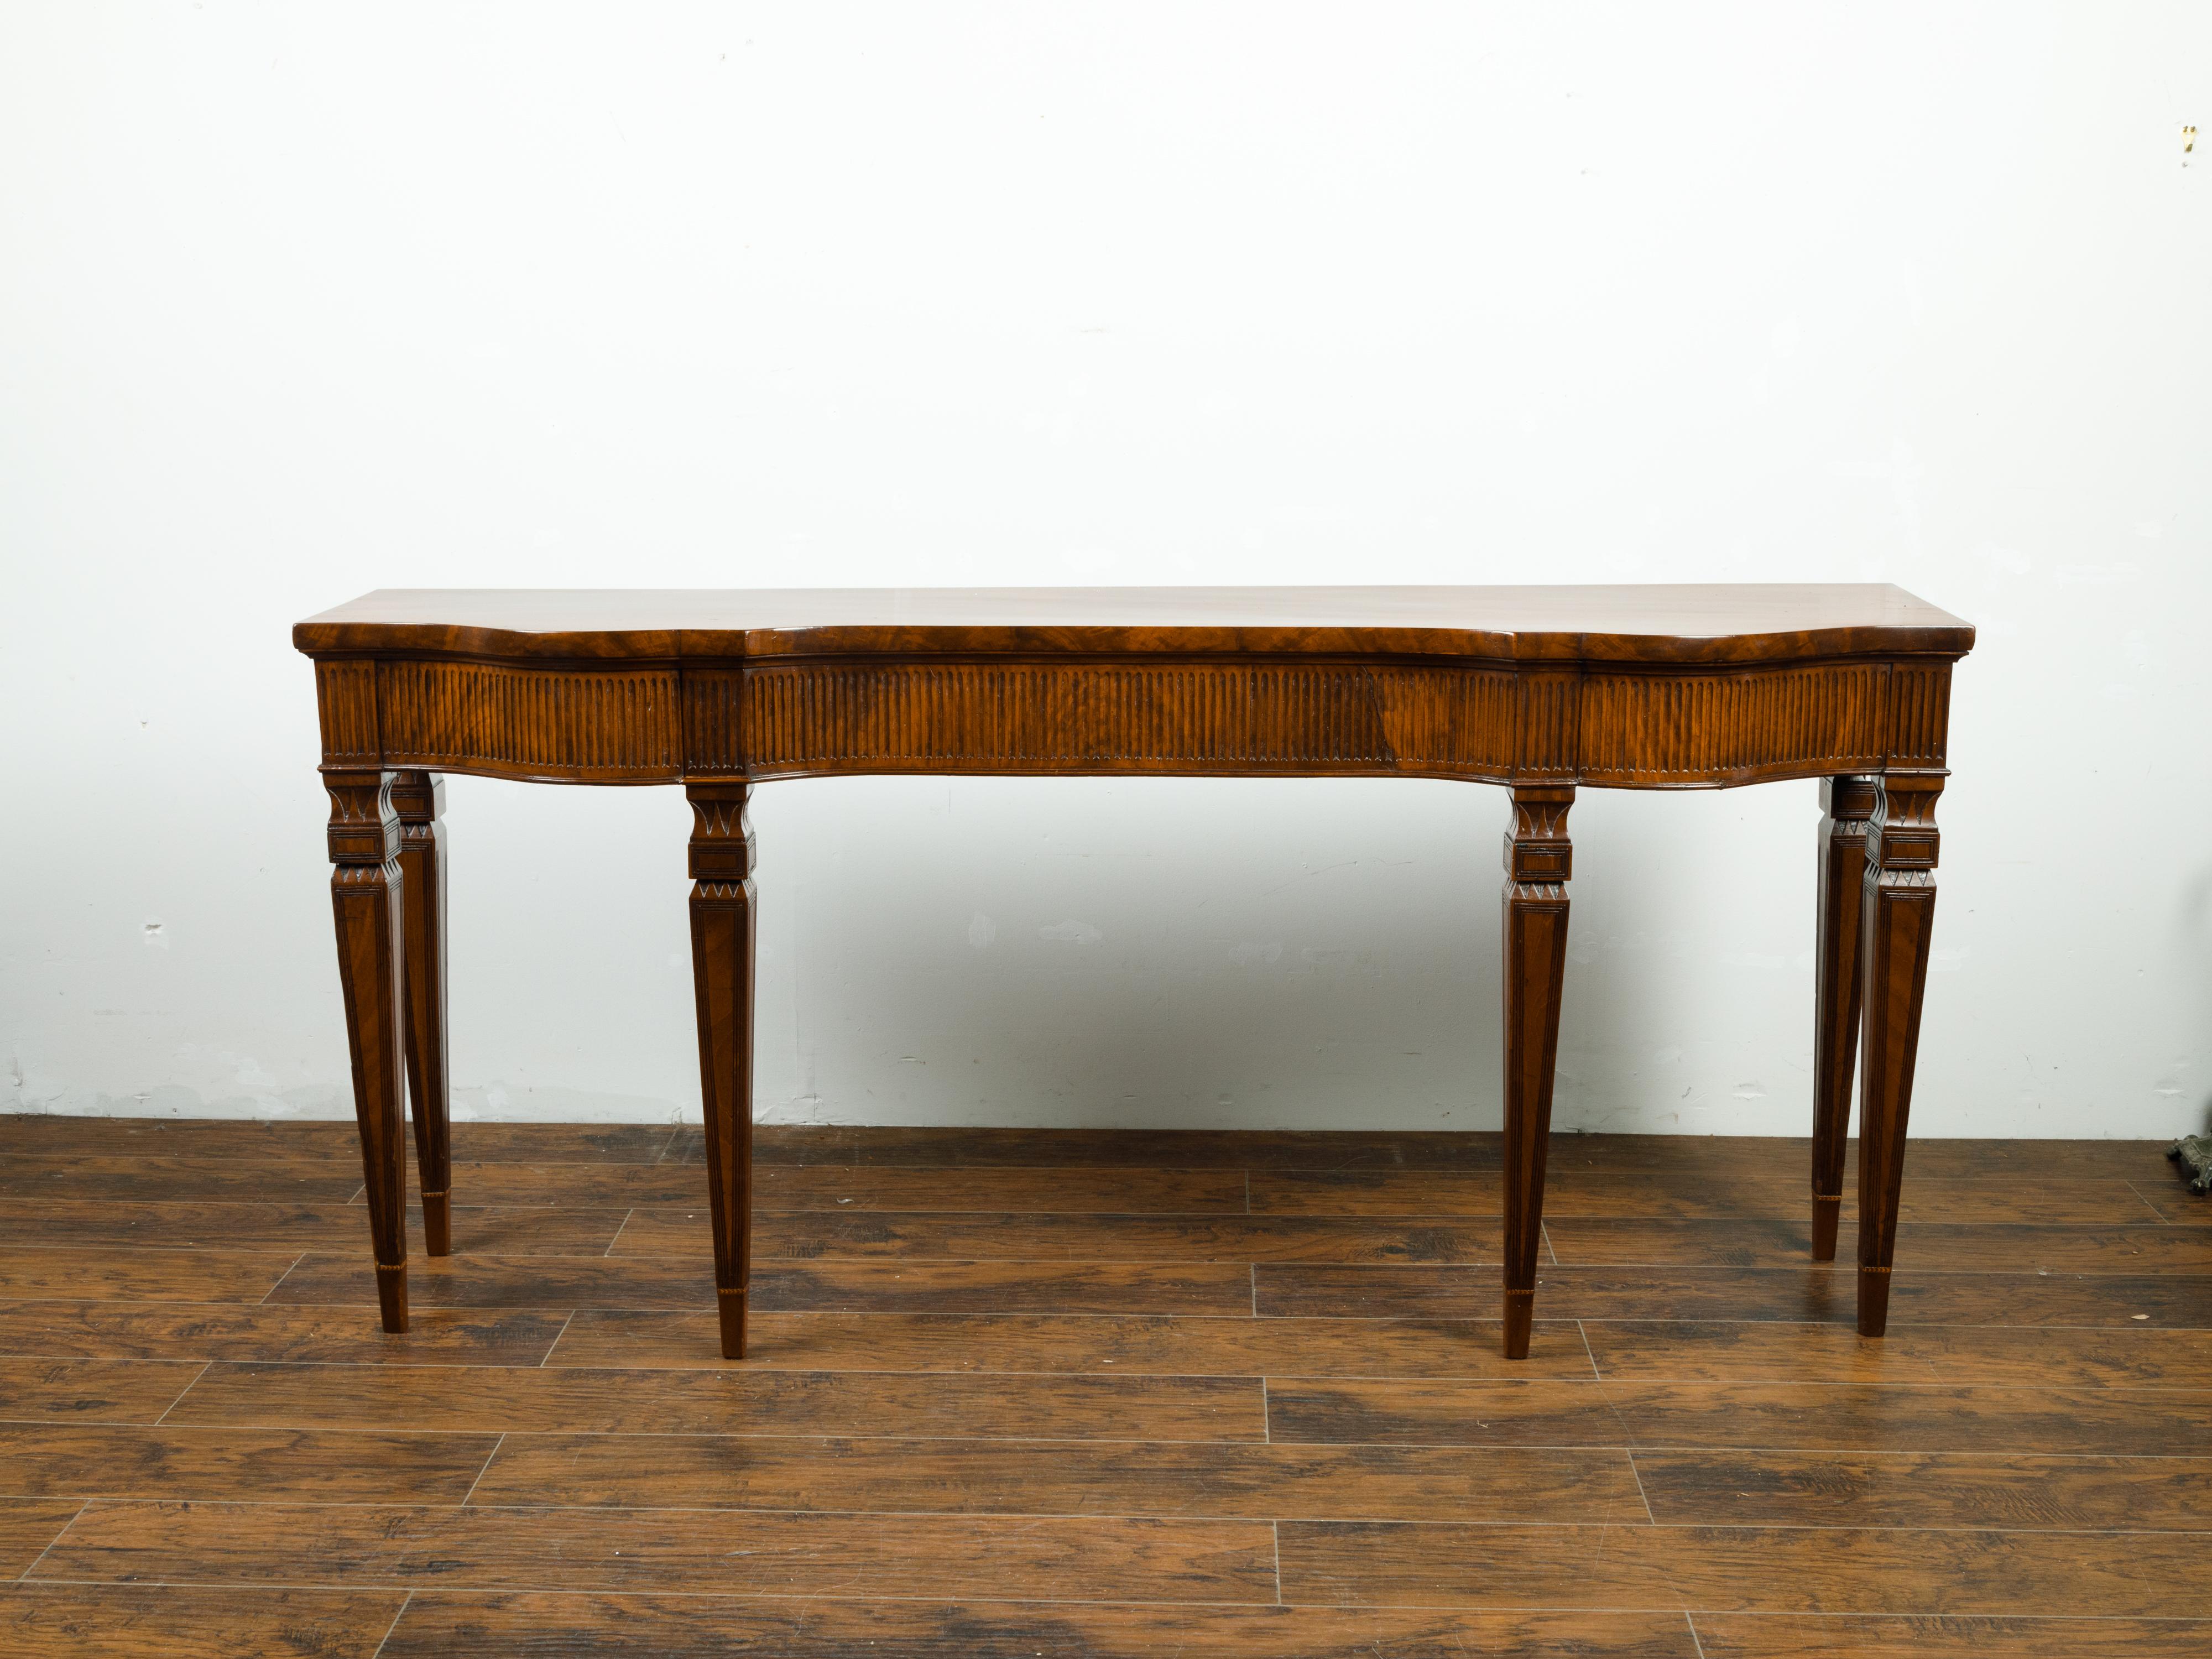 English mahogany console table from the mid 19th century, with fluted apron and tapered legs. Created in England during the 1850s, this mahogany console table features a shaped top sitting above a fluted serpentine apron. The ensemble is raised on